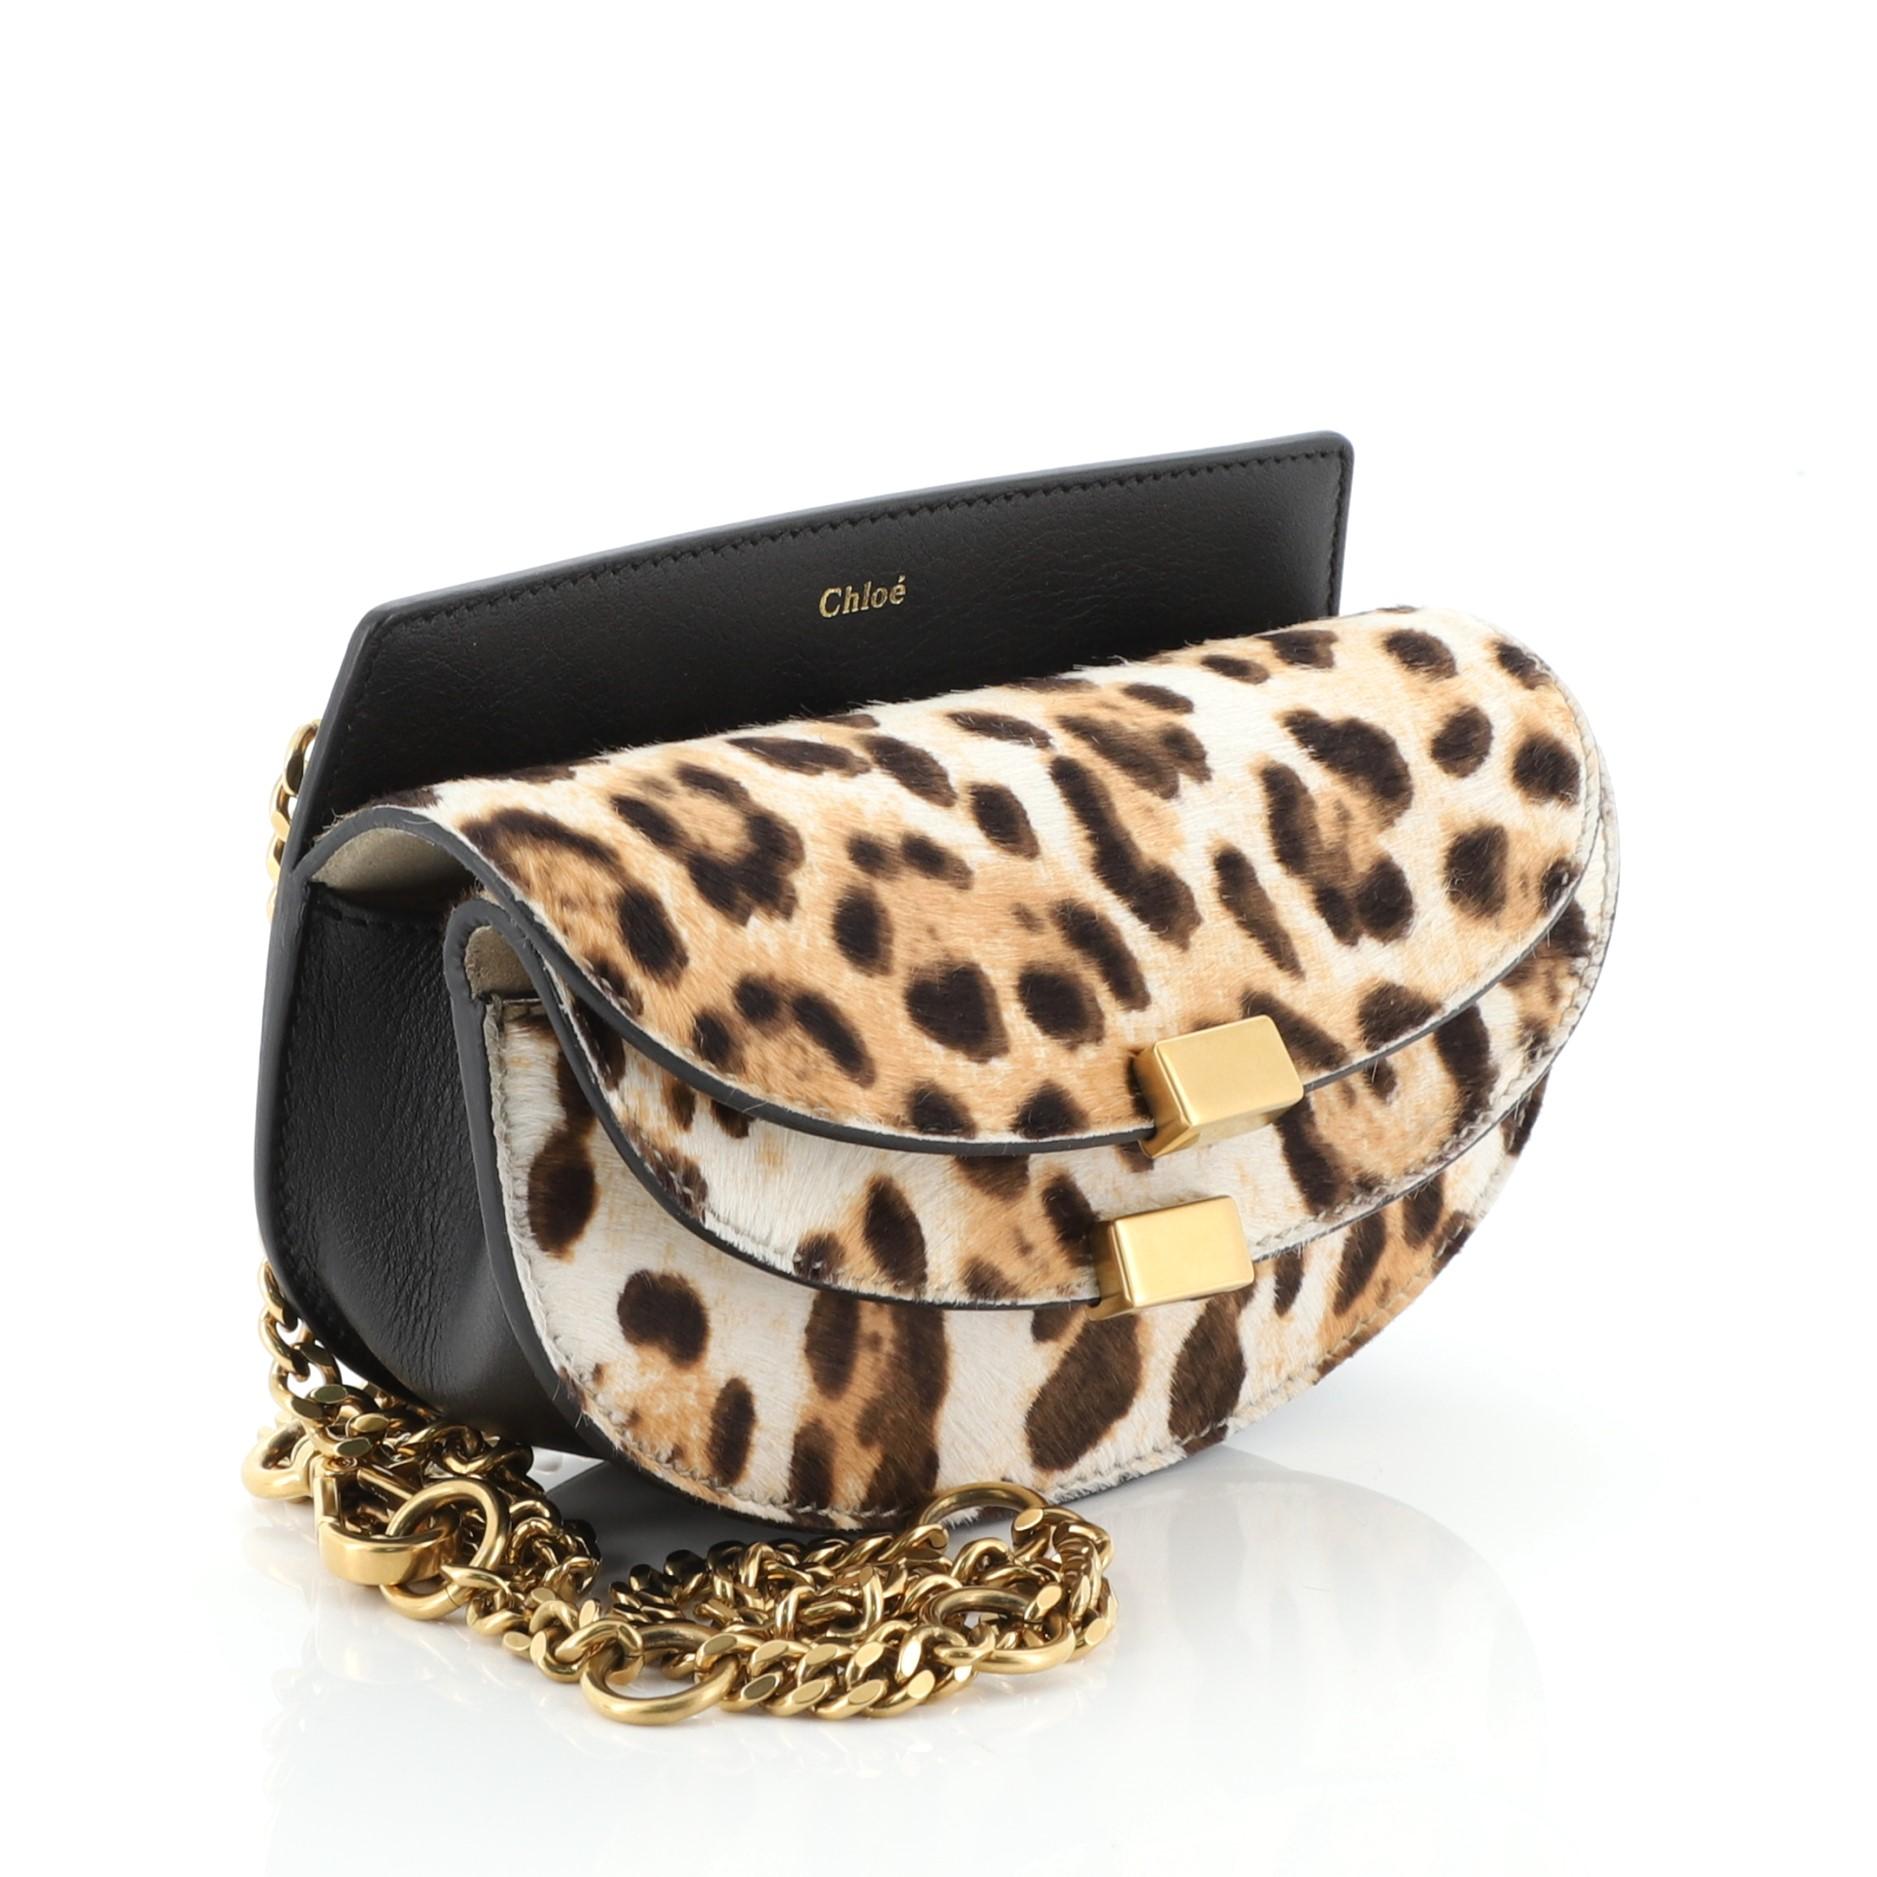 This Chloe Georgia Belt Bag Printed Pony Hair, crafted in black leather and printed pony hair, features chain-link strap and mate gold-tone hardware. Its snap closure opens to a neutral suede interior. 

Estimated Retail Price: $1,070
Condition: